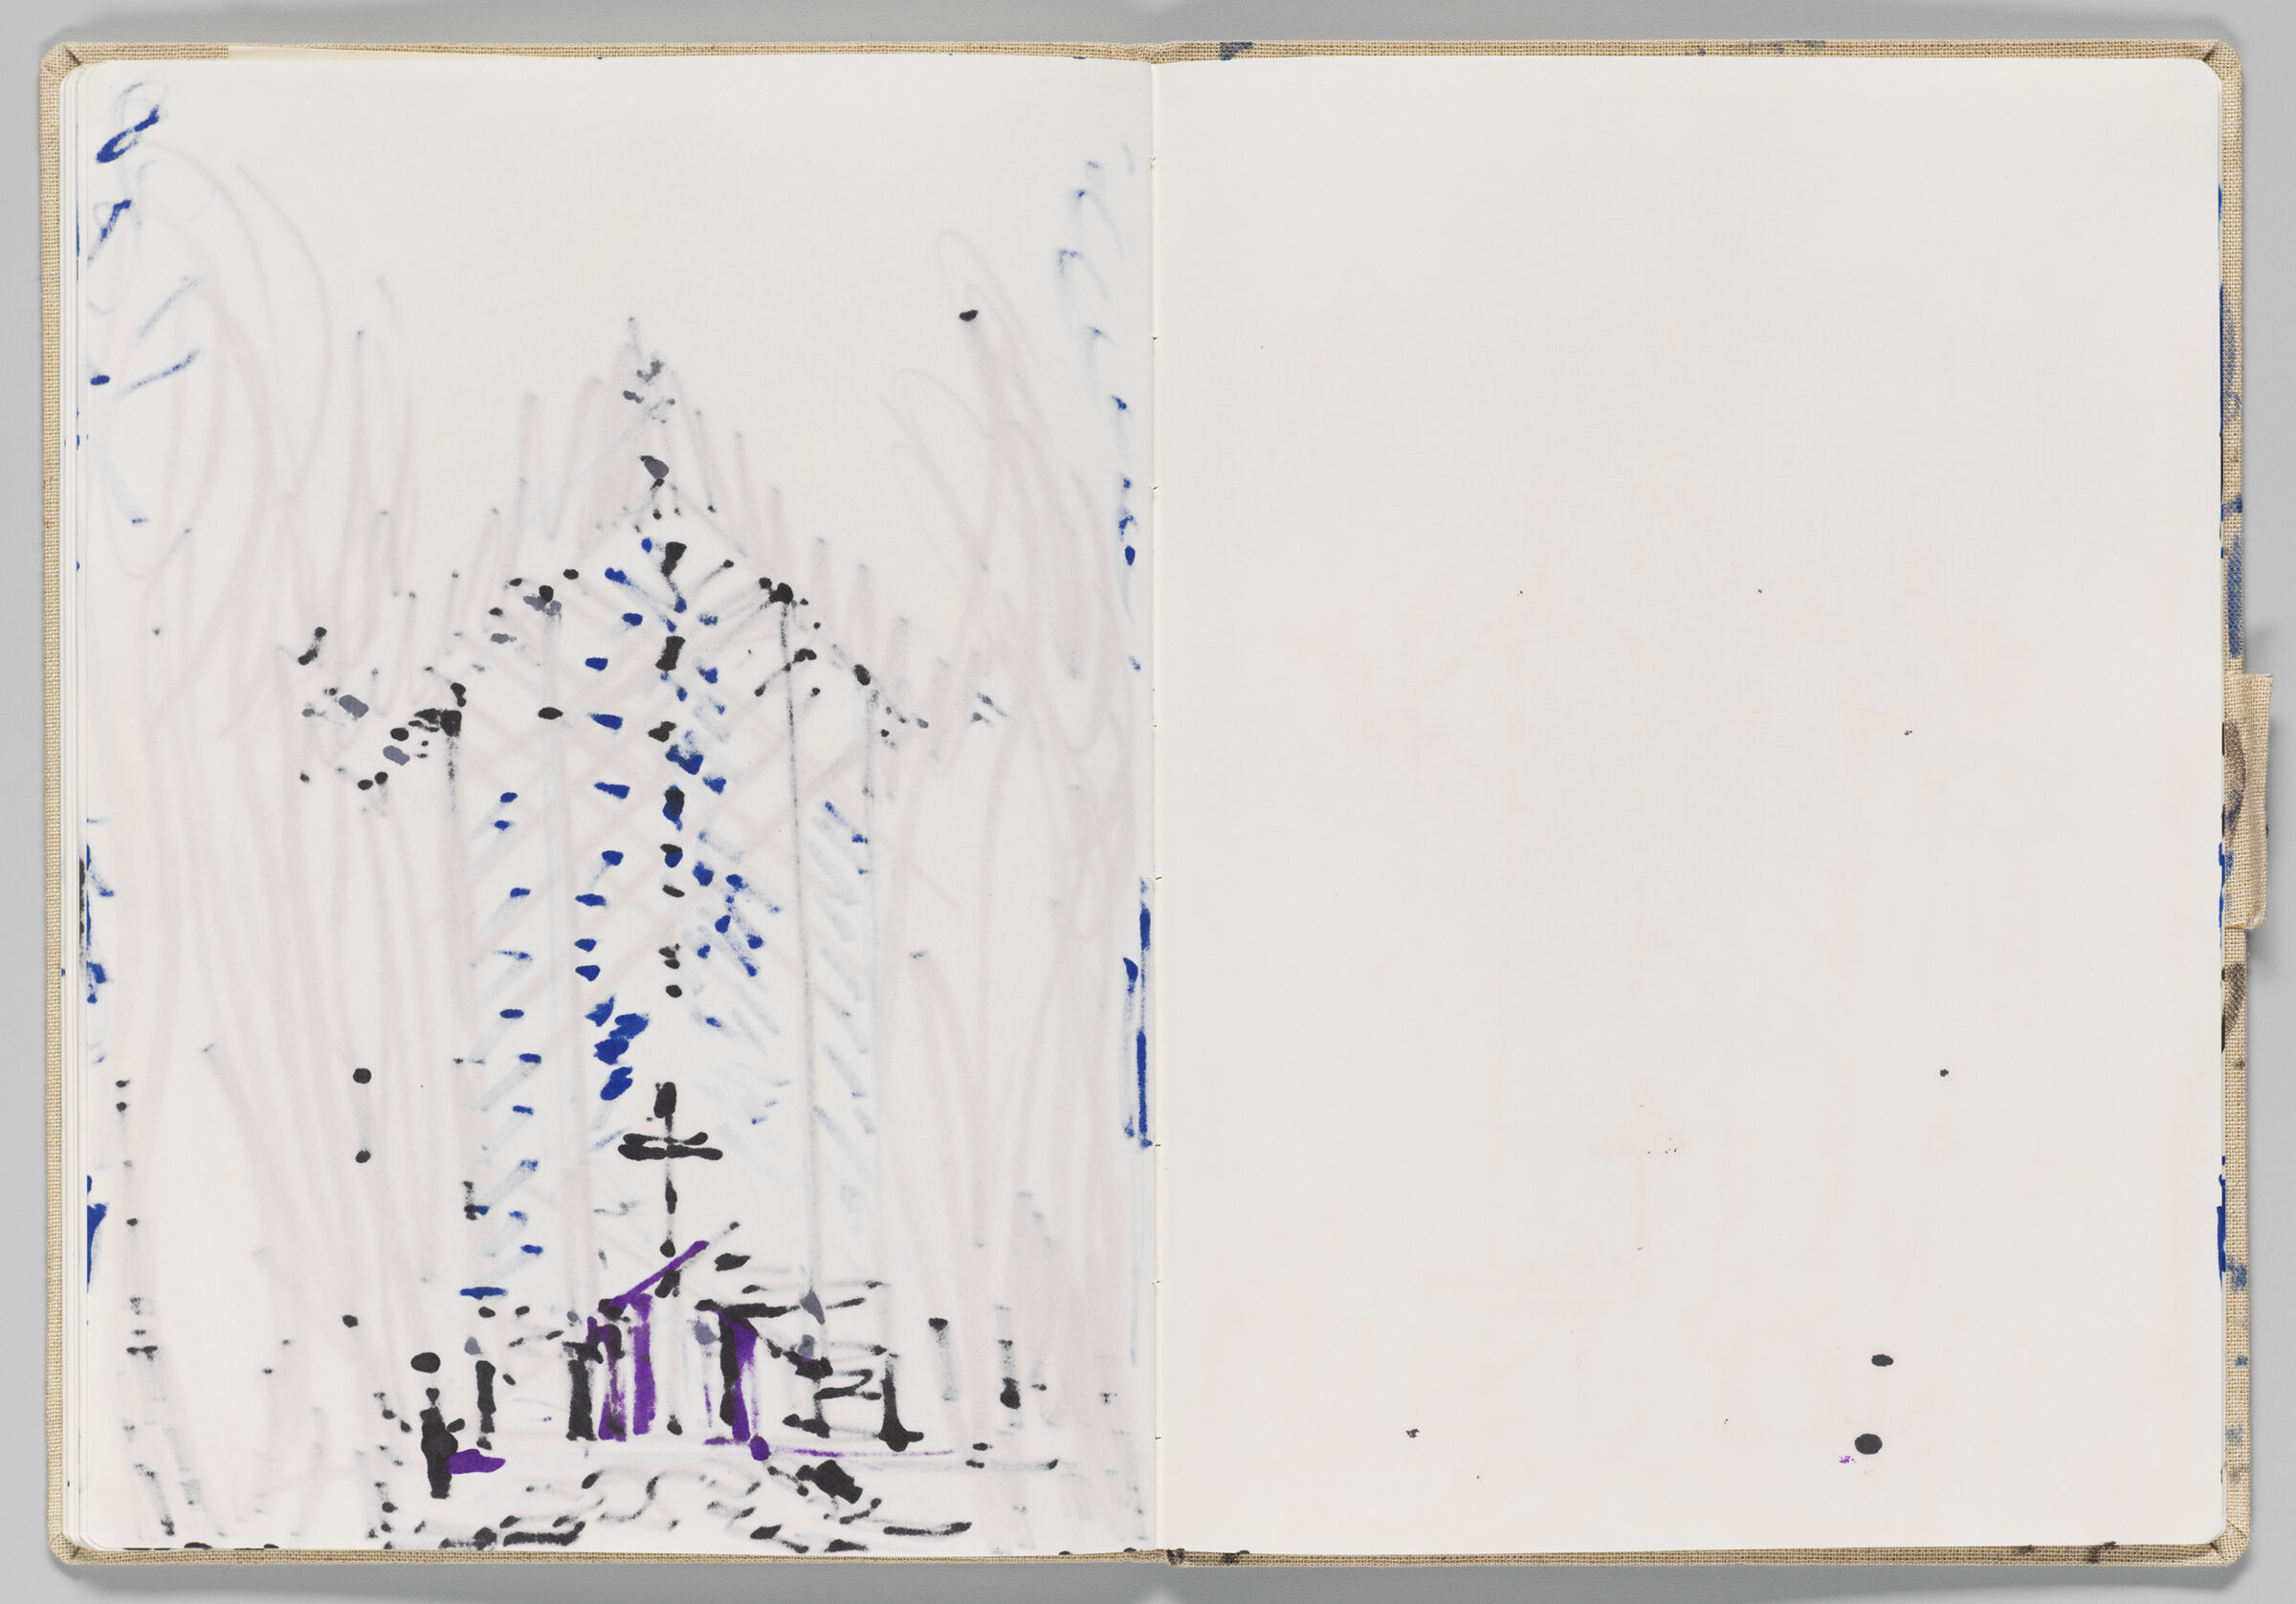 Untitled (Bleed-Through Of Previous Page, Left Page); Untitled (Blank With Stray Marks, Right Page)